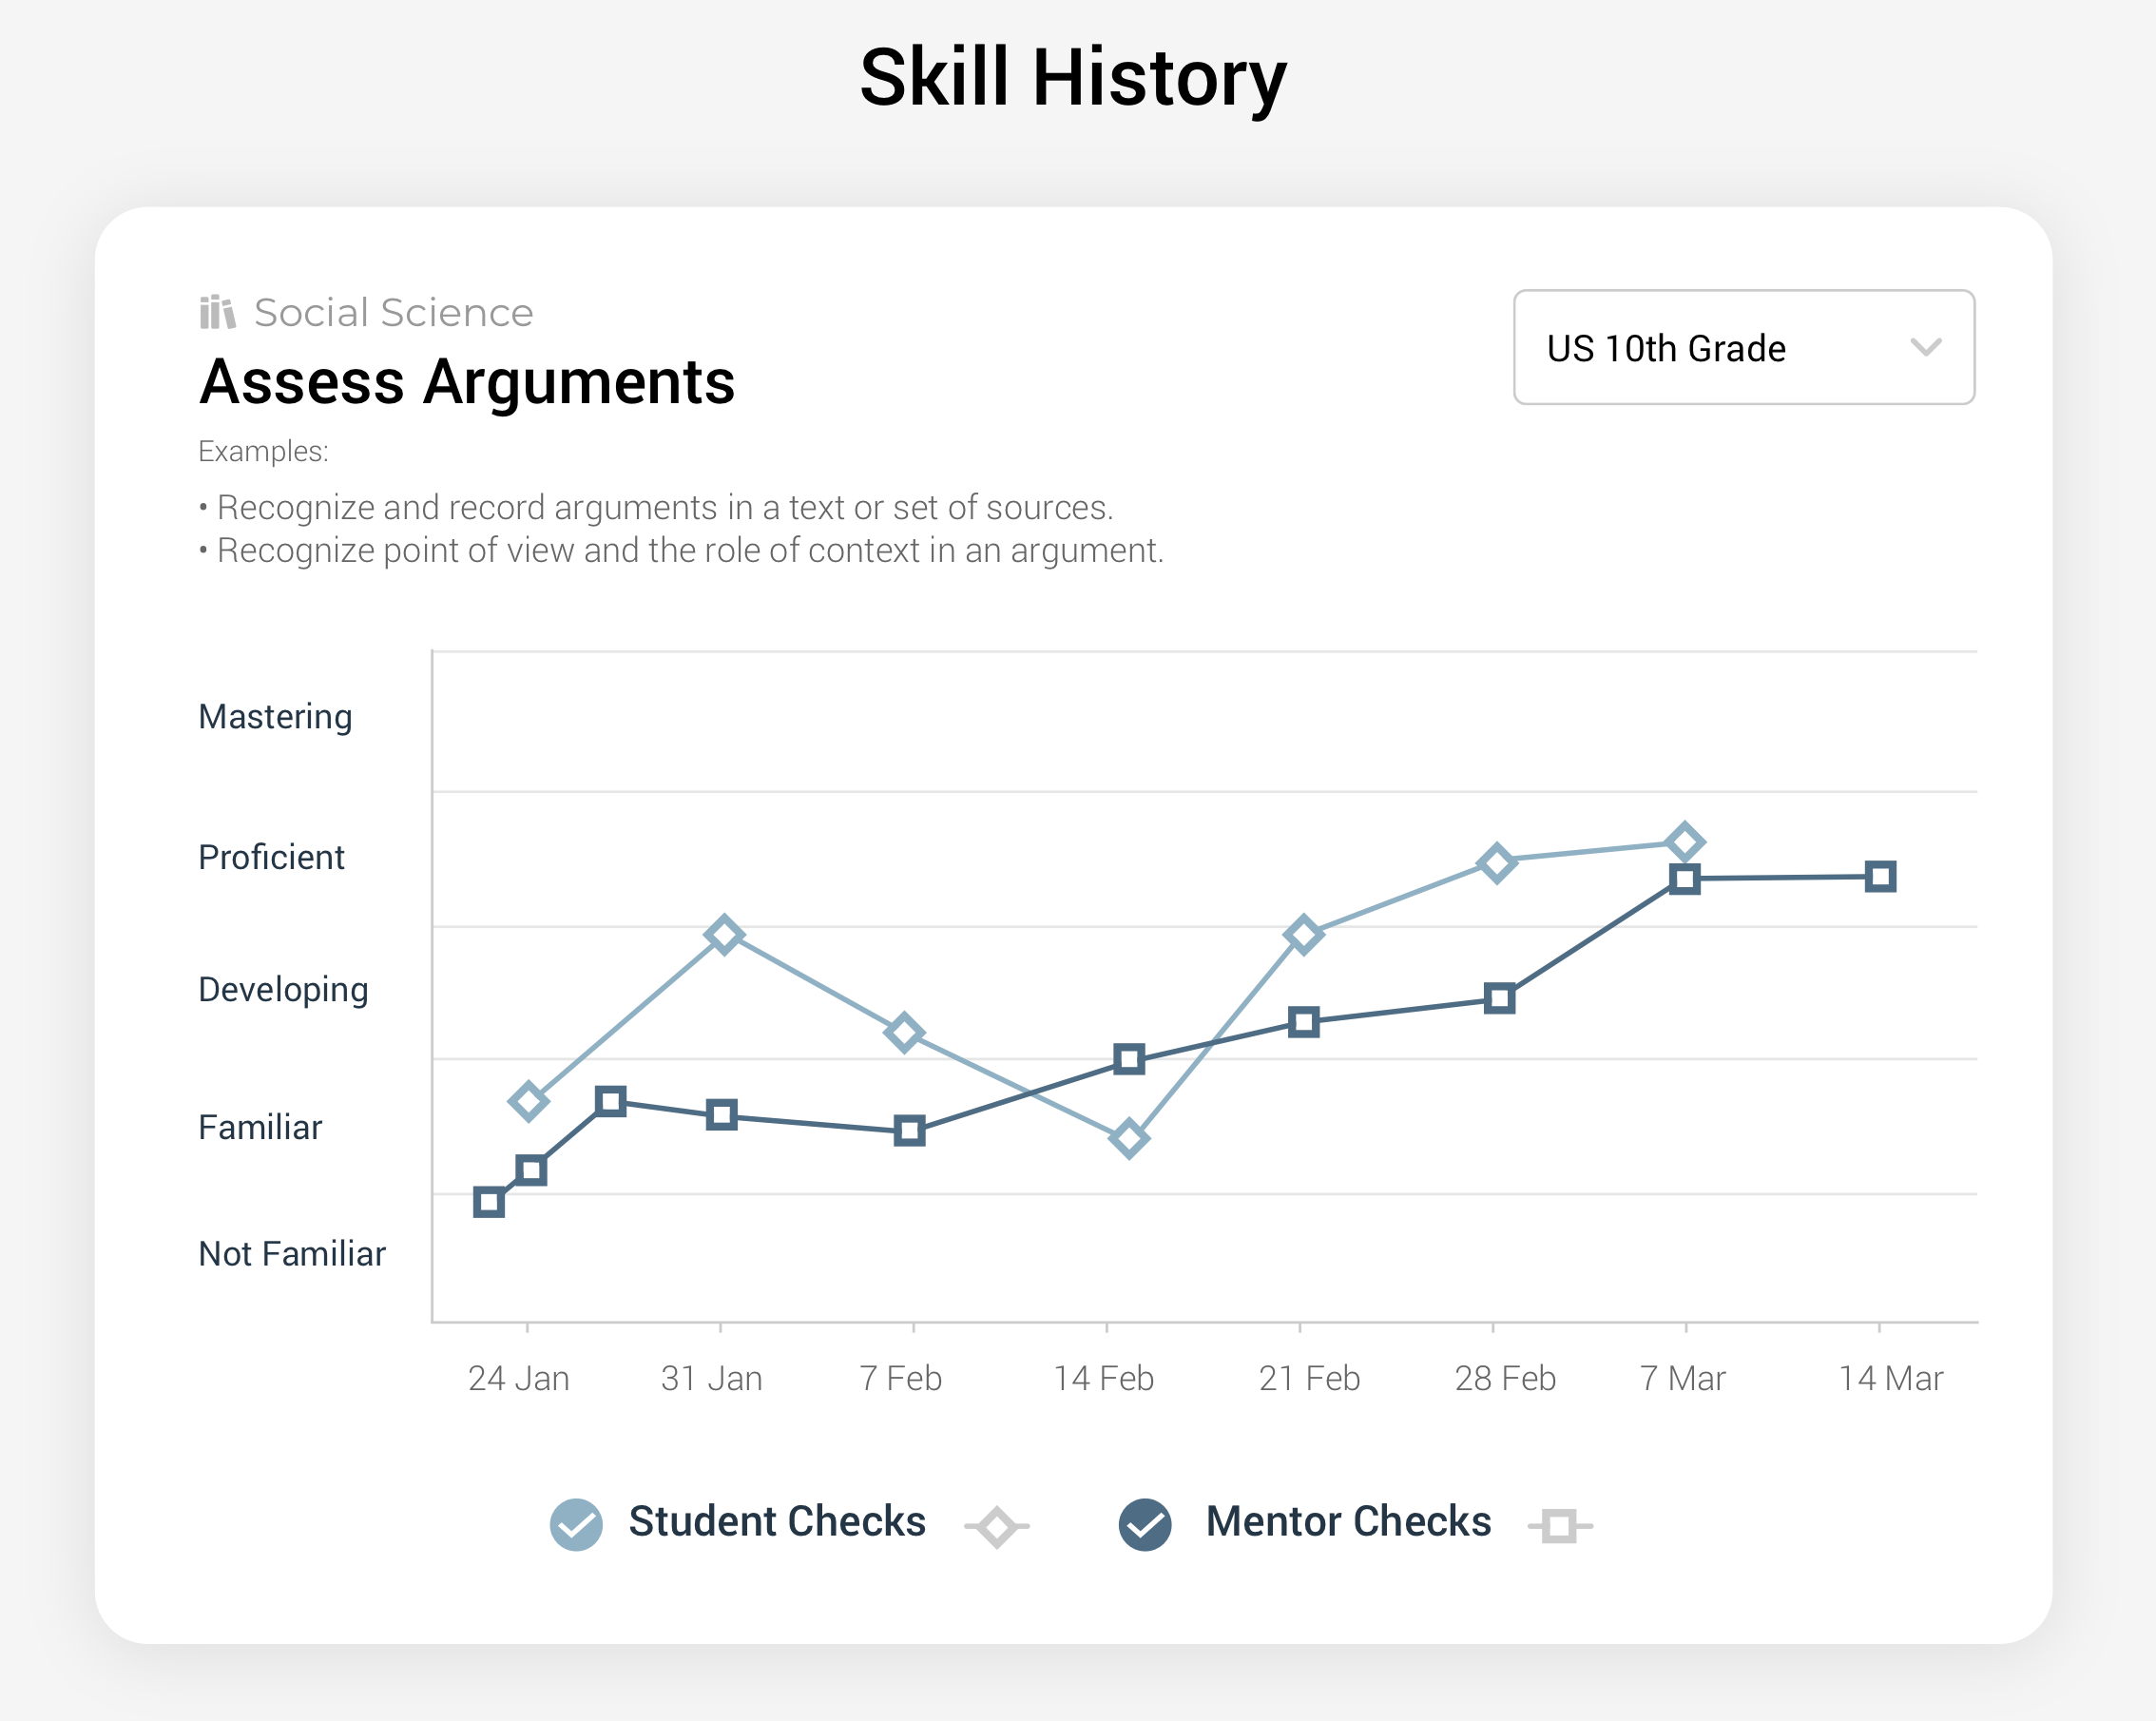 A screenshot from the Quest Forward LMS shows a graph of skills progress, plotting points for both student self-assessments and mentor assessments of the student. The dots show an upward trend.